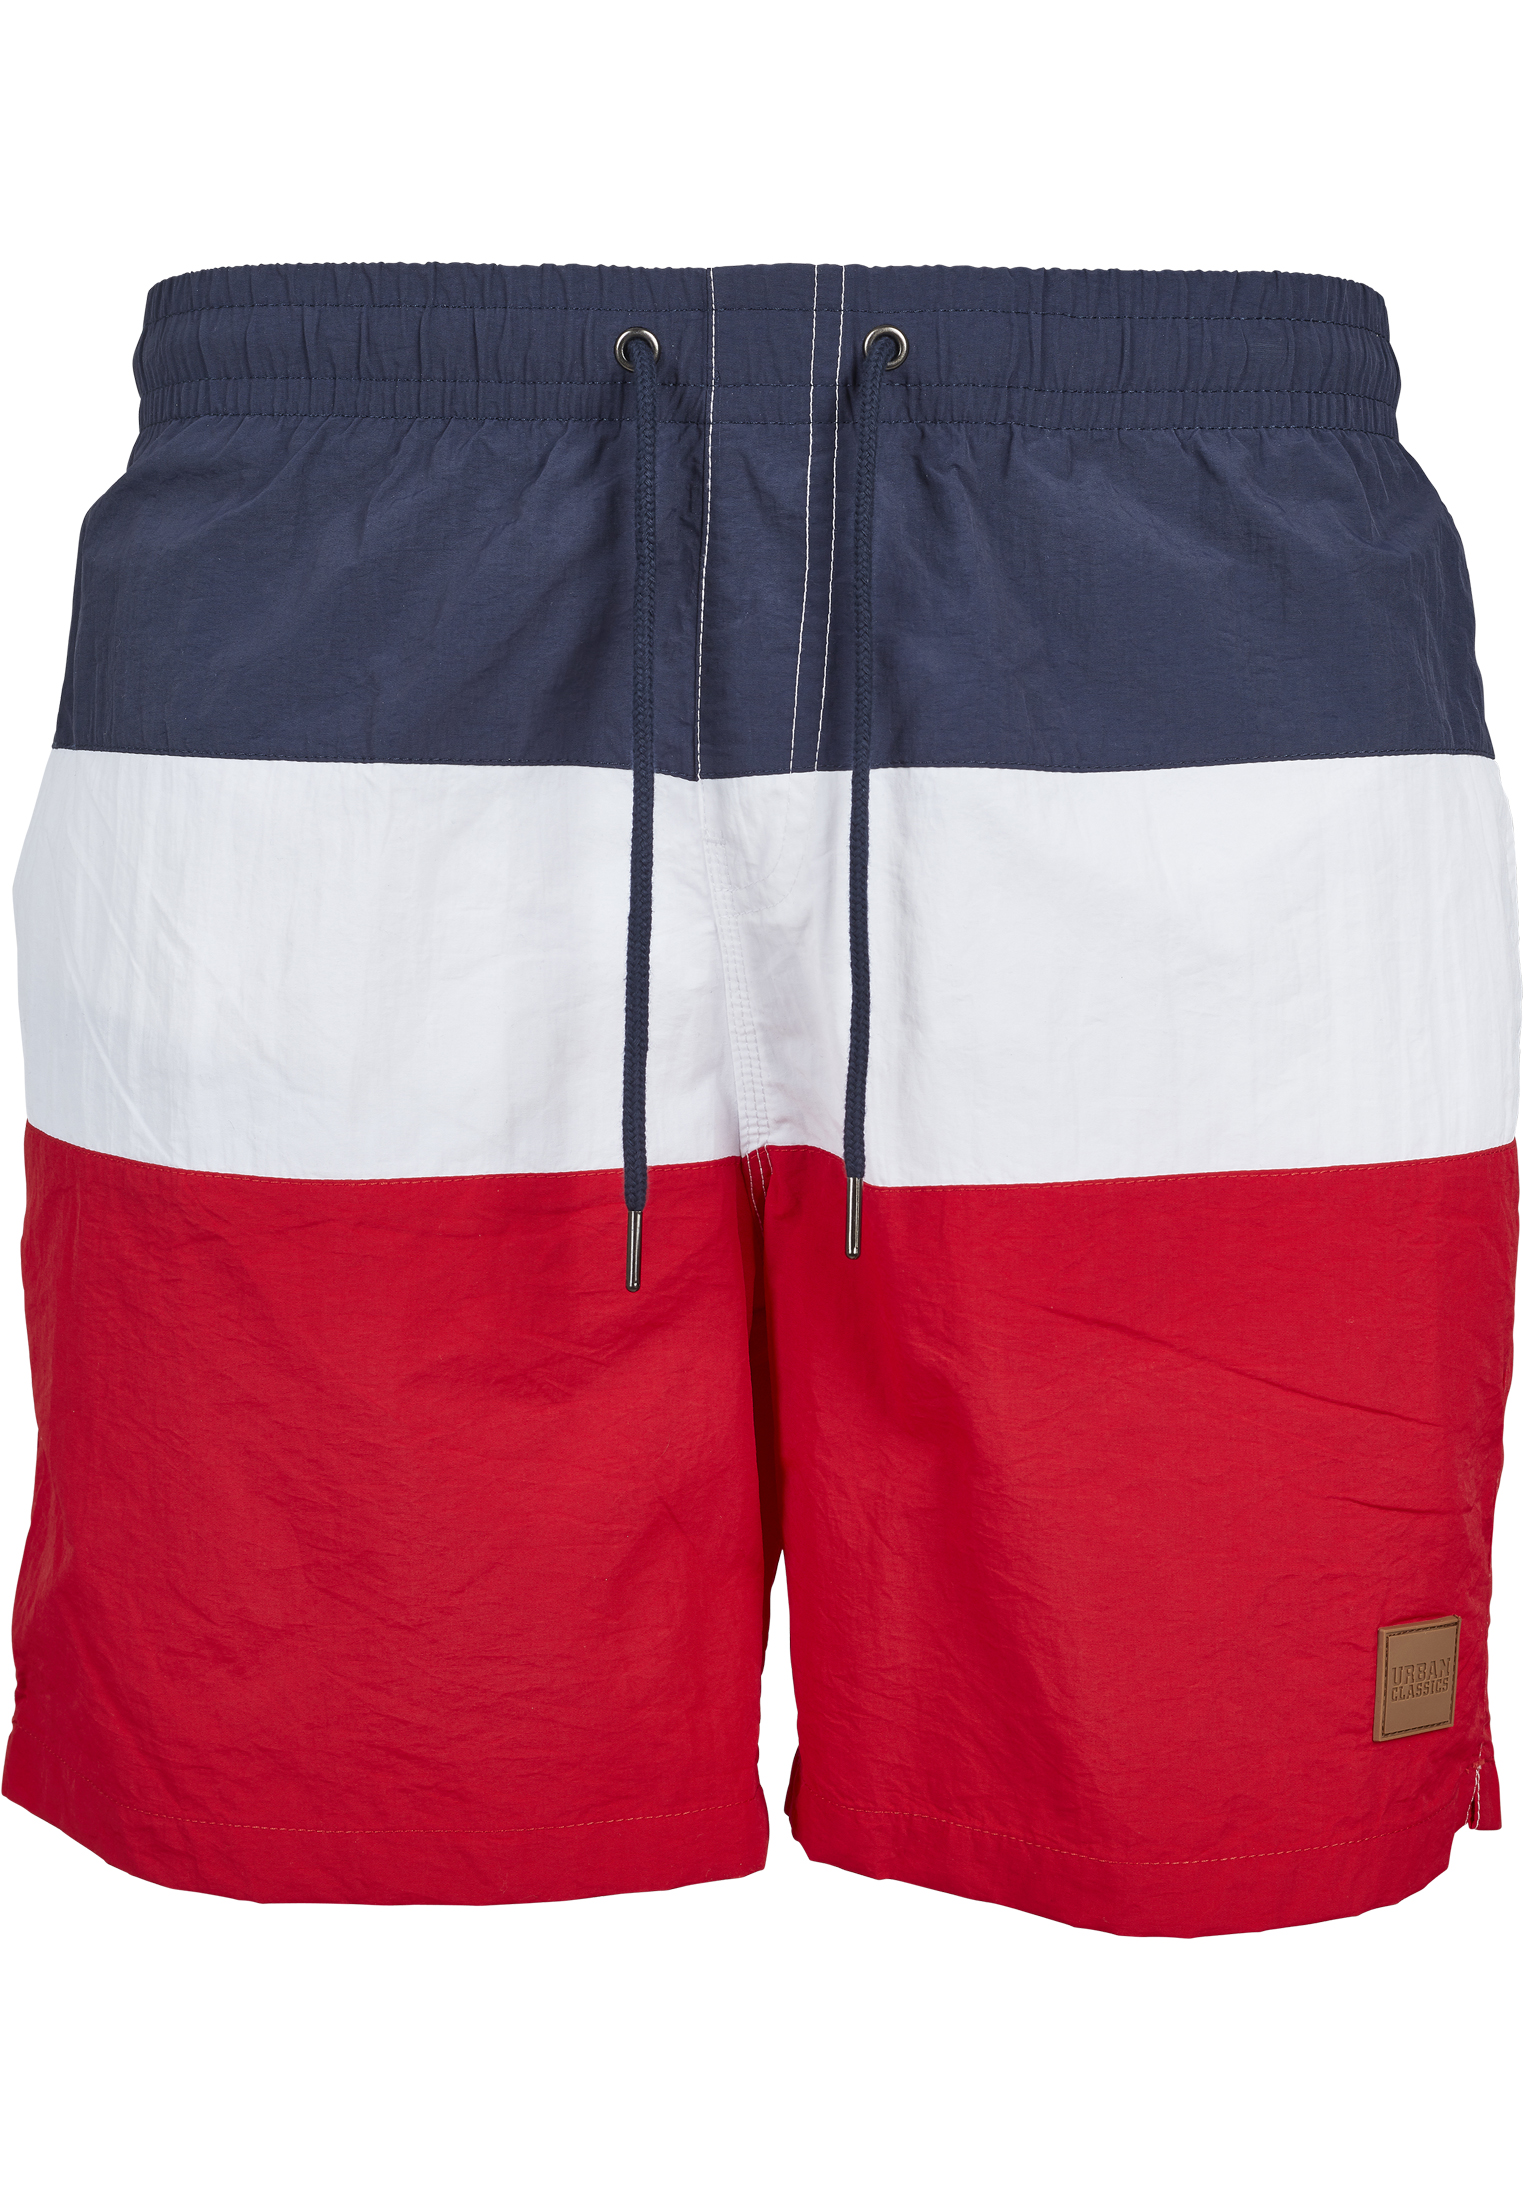 Bademode Color Block Swimshorts in Farbe firered/navy/white